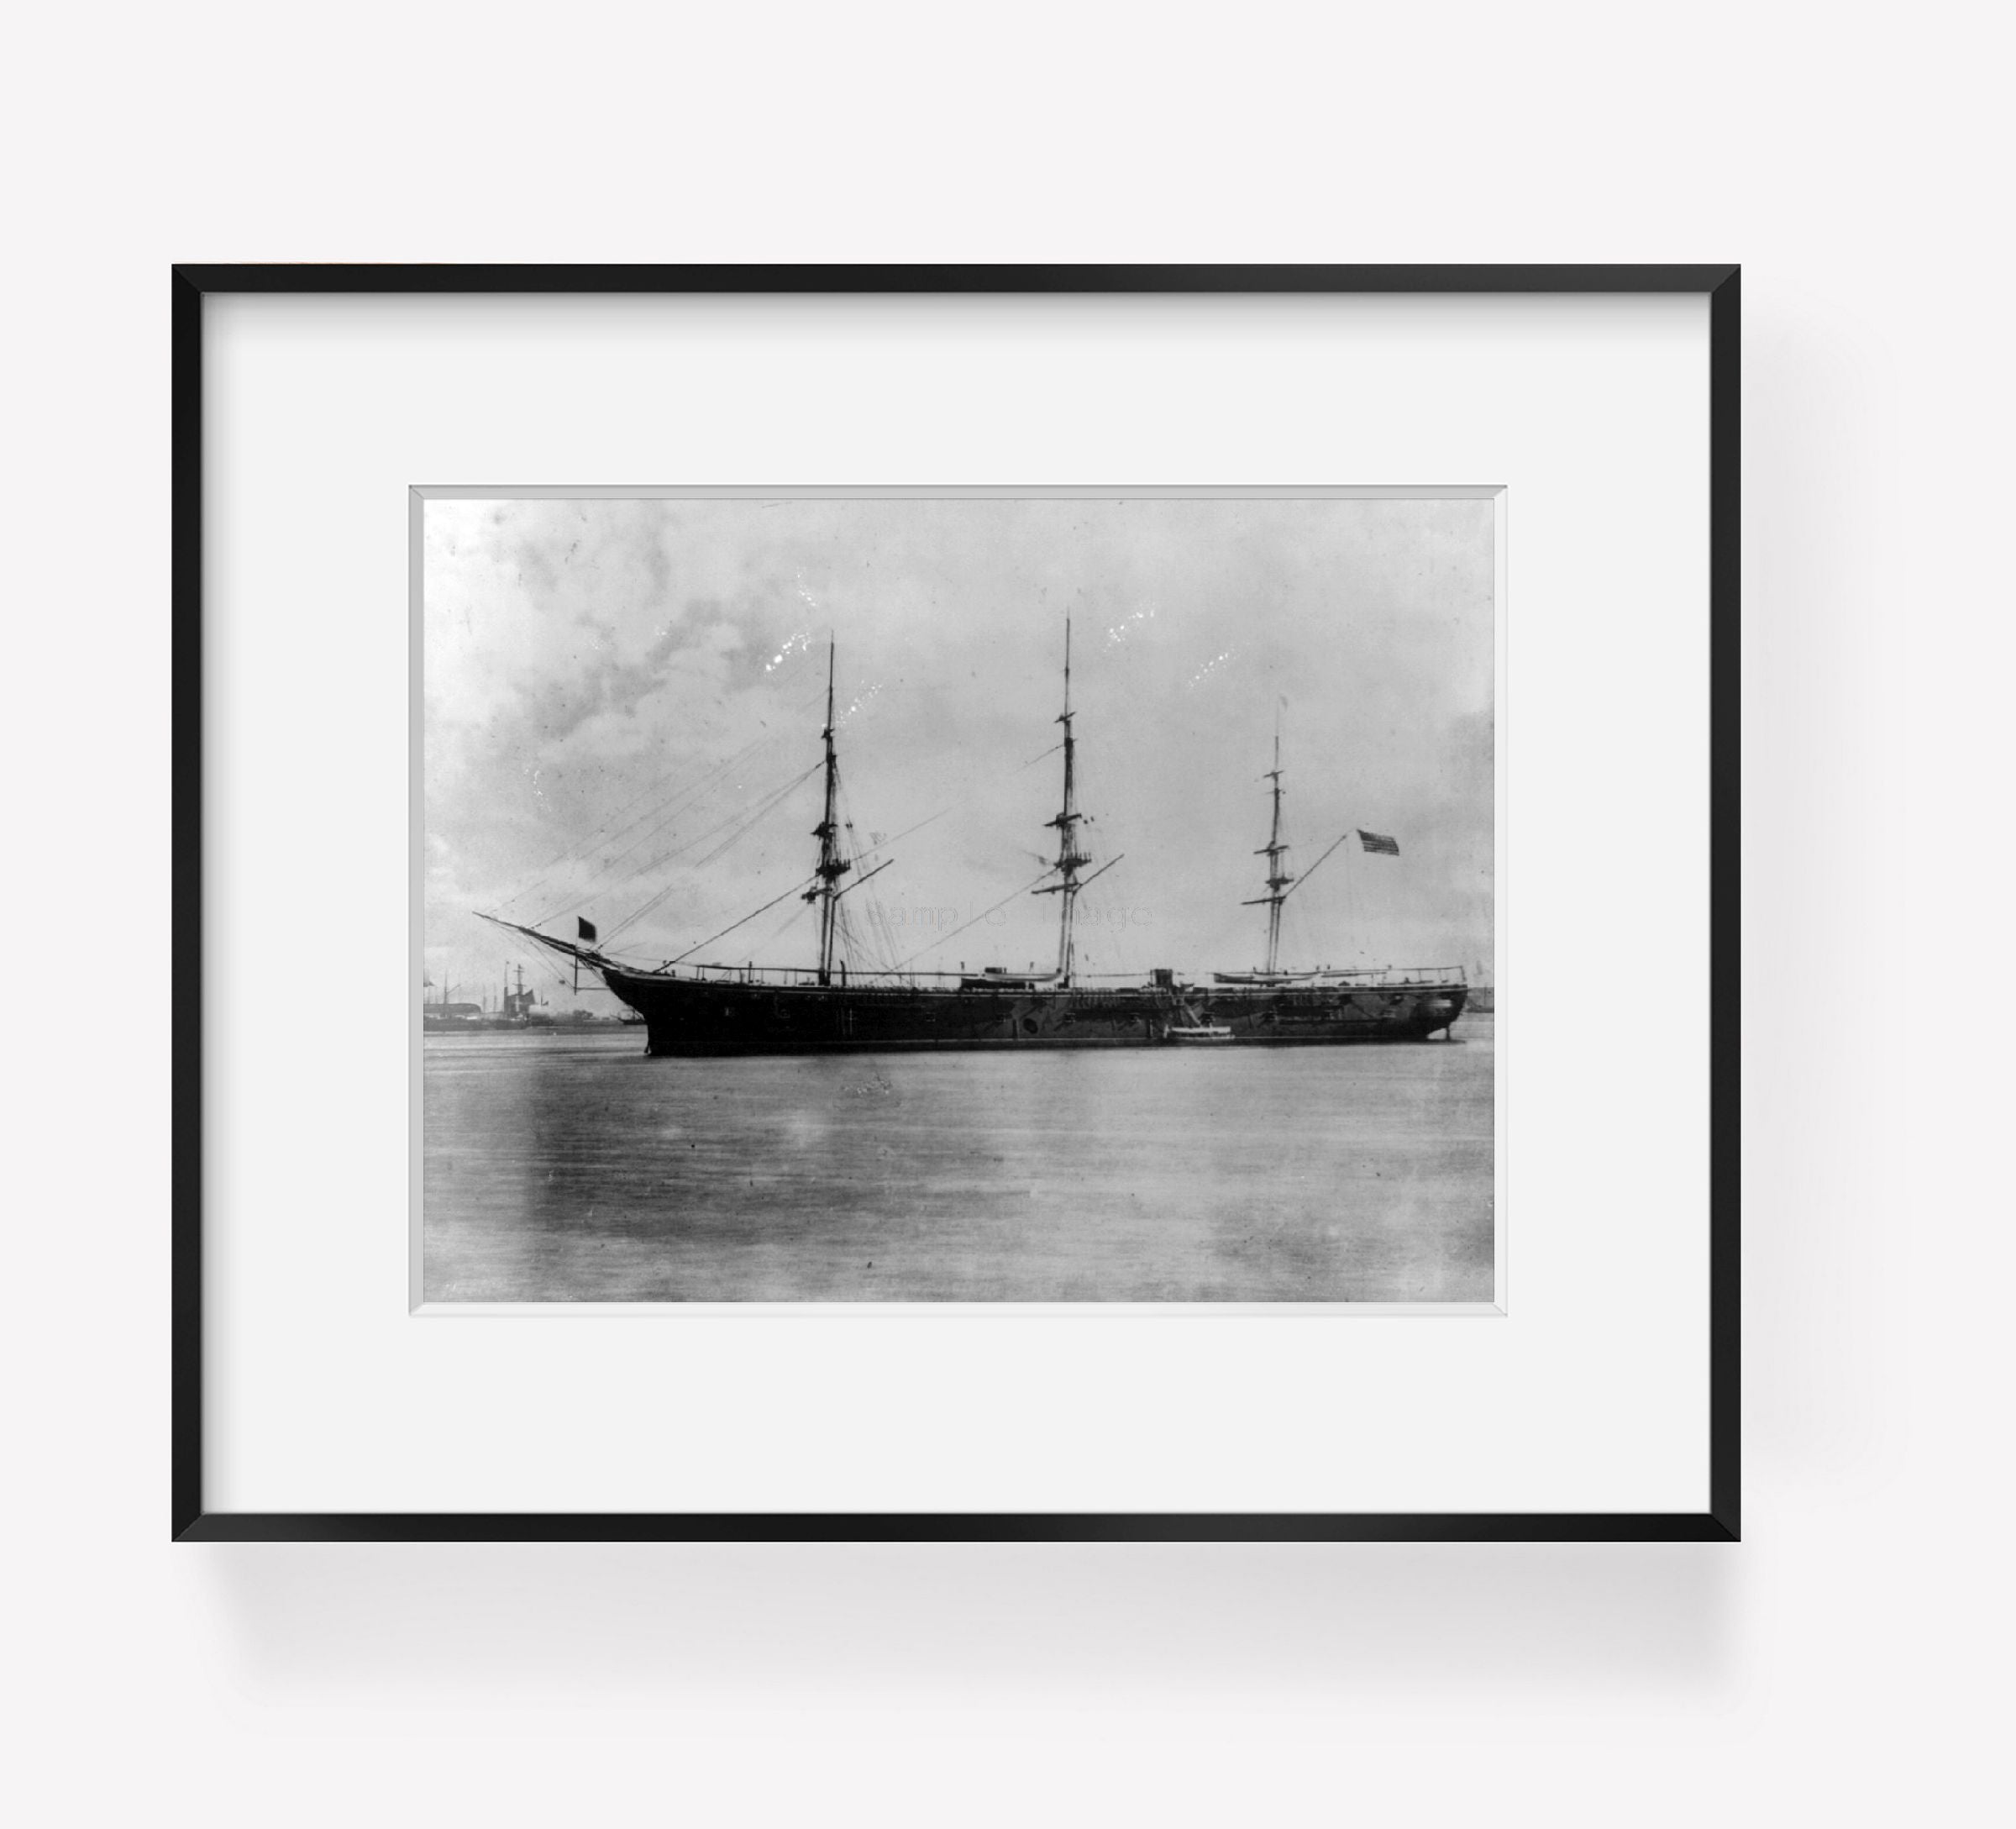 between 1895 and 1900 photograph of U.S.S. TENNESSEE port view